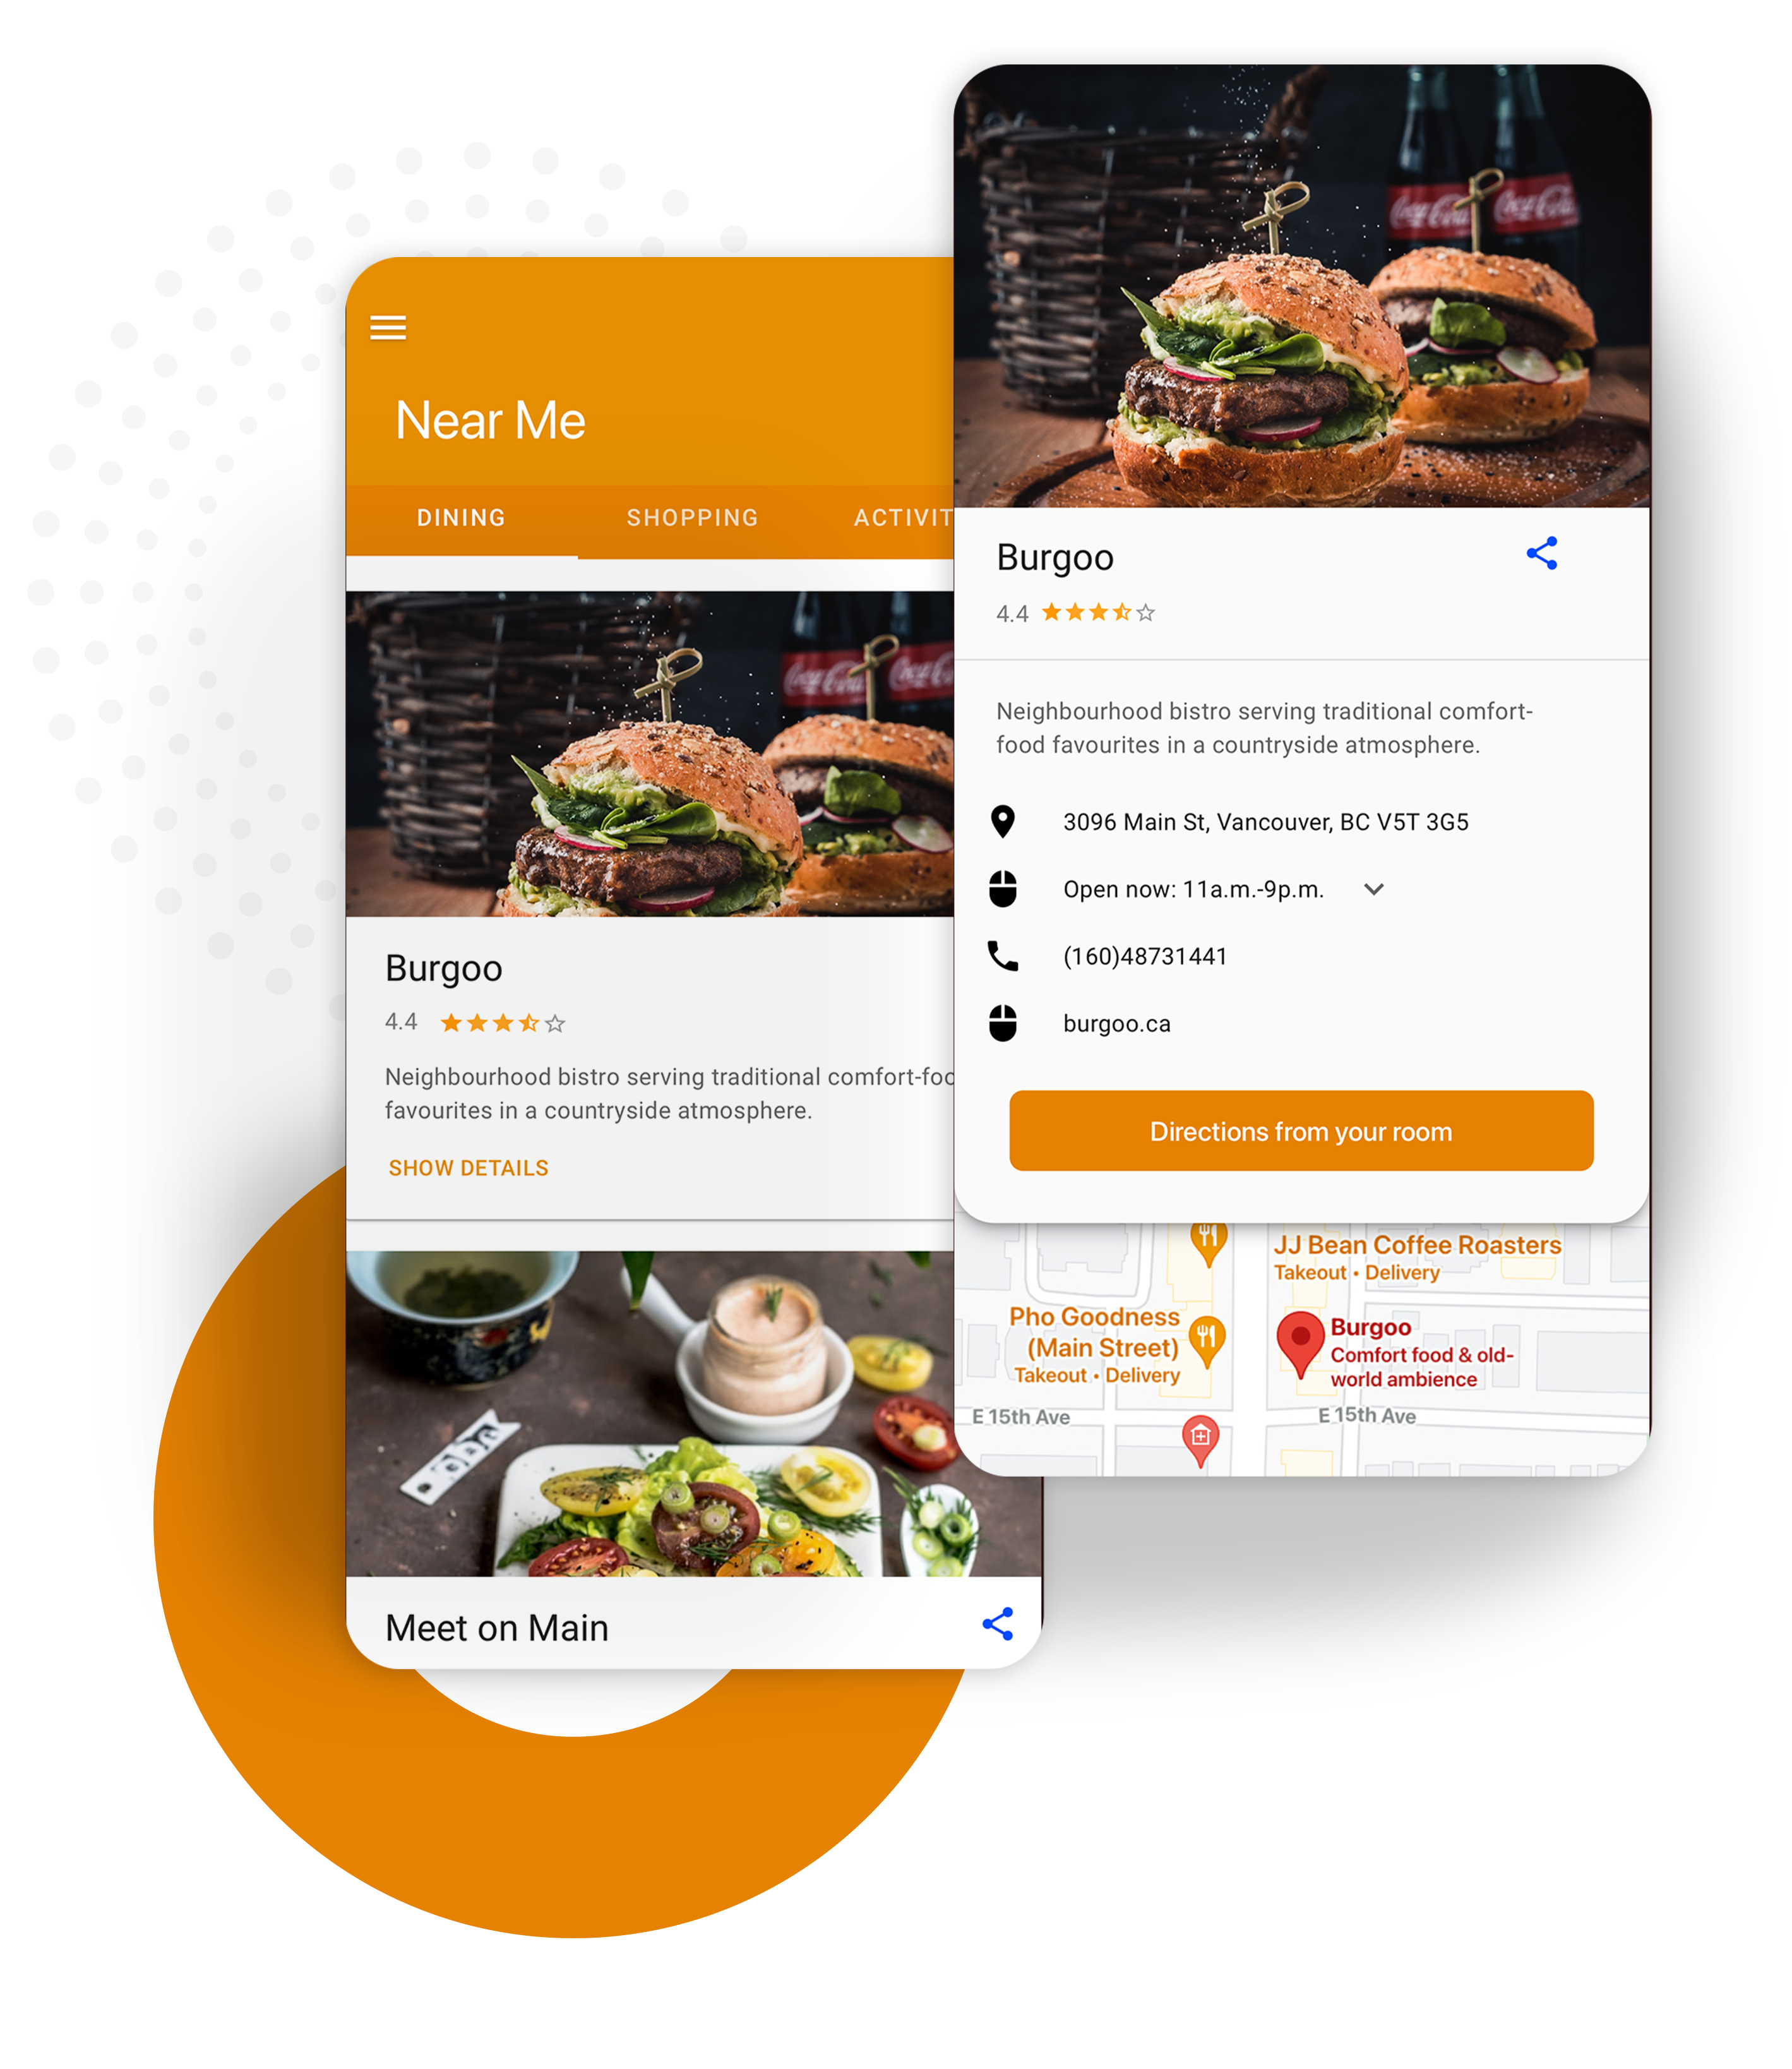 This is the profile for a location saved and displayed on Operto that is found in the users 'near me' search, with the business description, images, and rating as well as more insightful features and key information for customers and prospects.